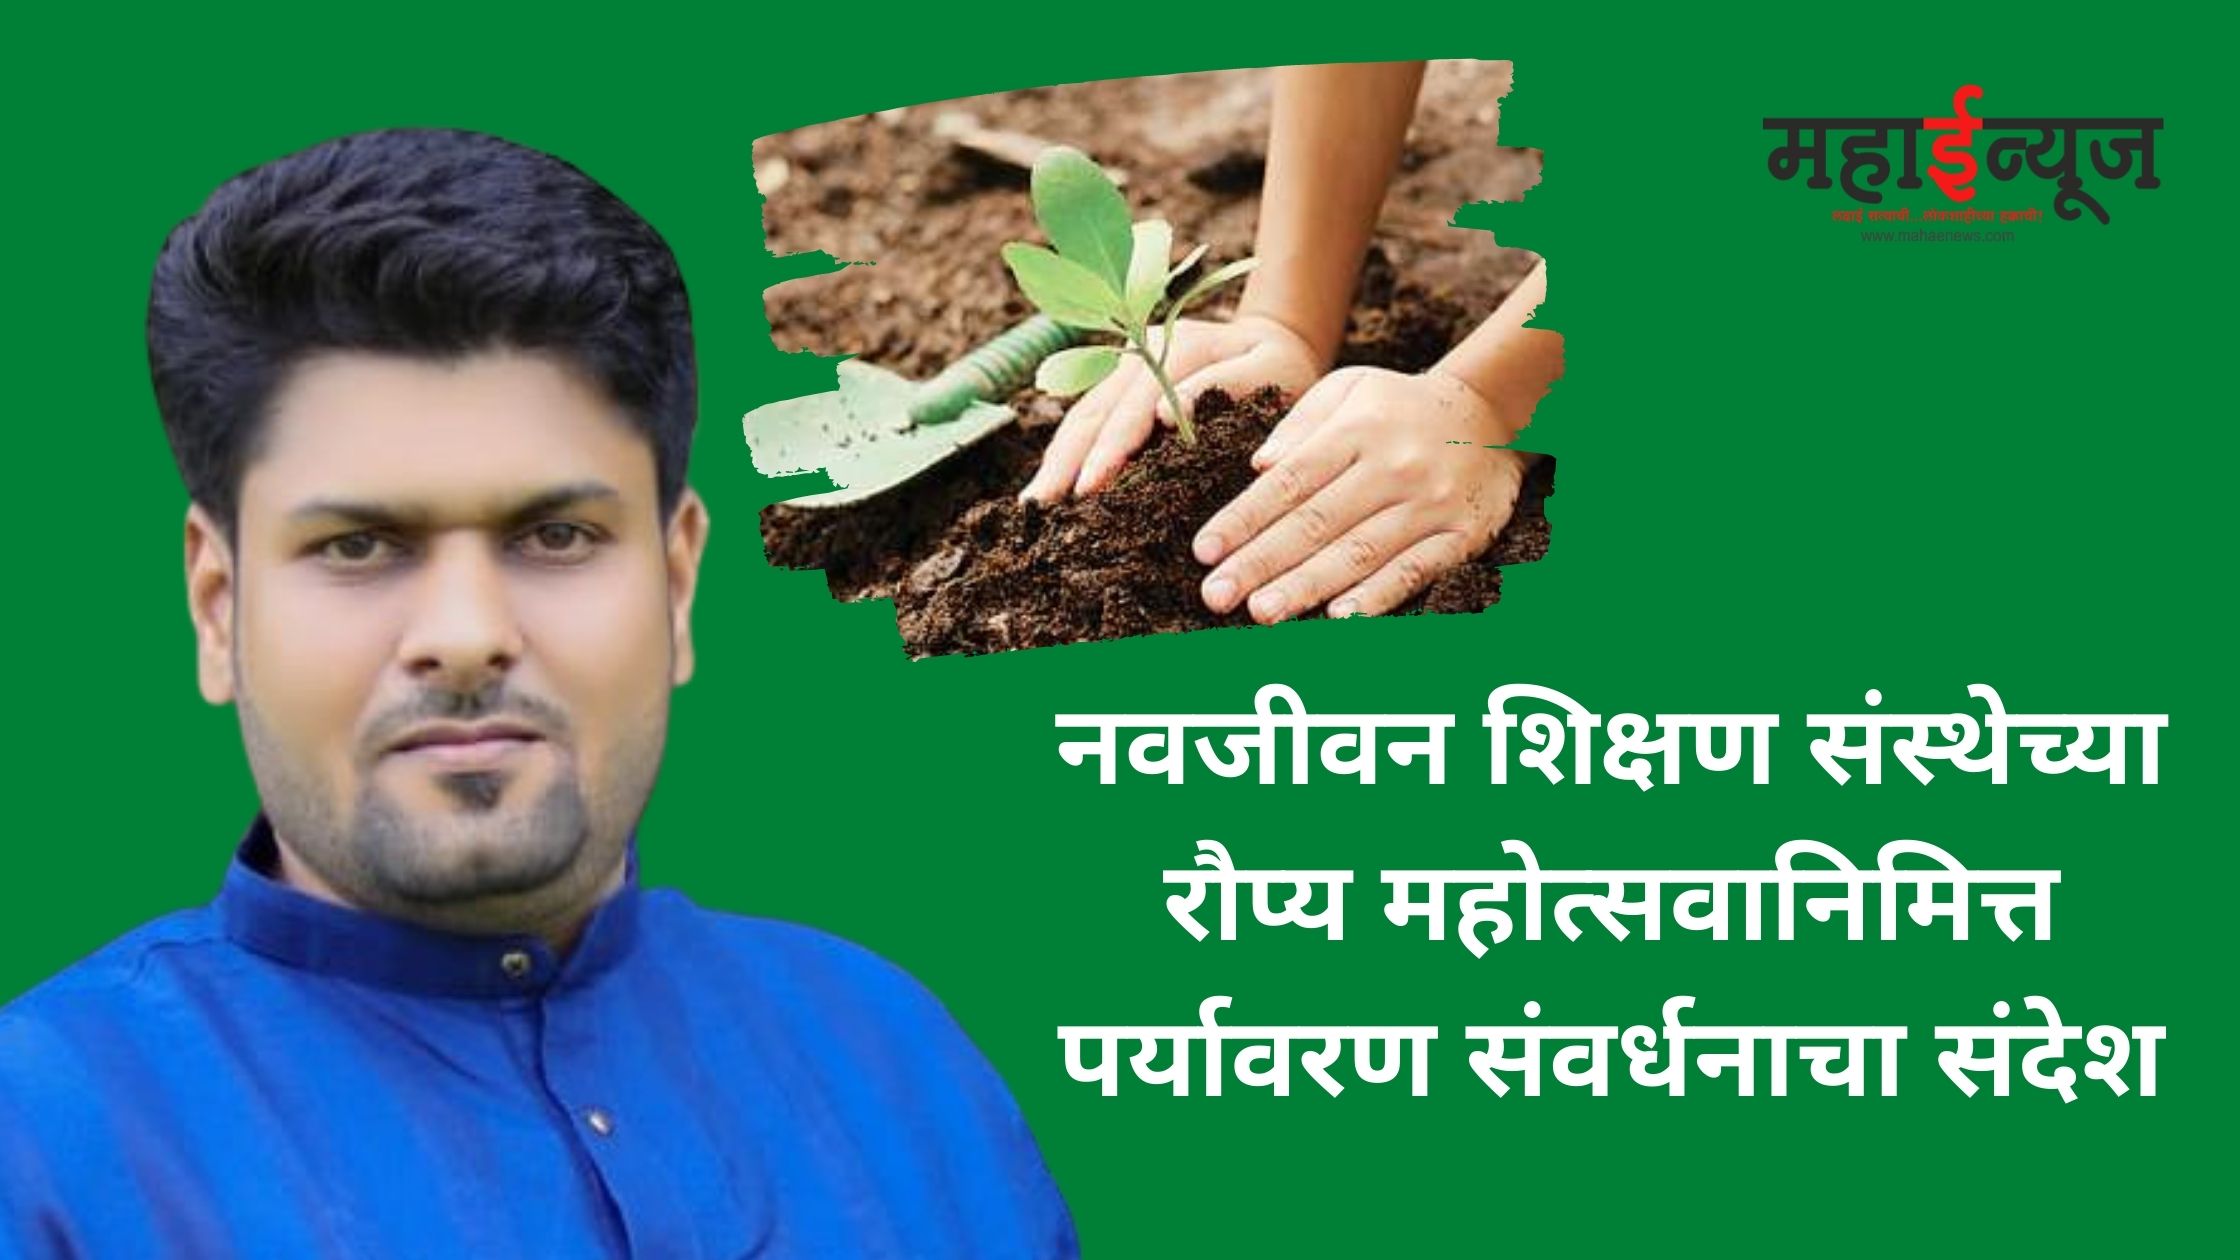 Environmental conservation message on the occasion of Silver Jubilee of Navjivan Shikshan Sanstha